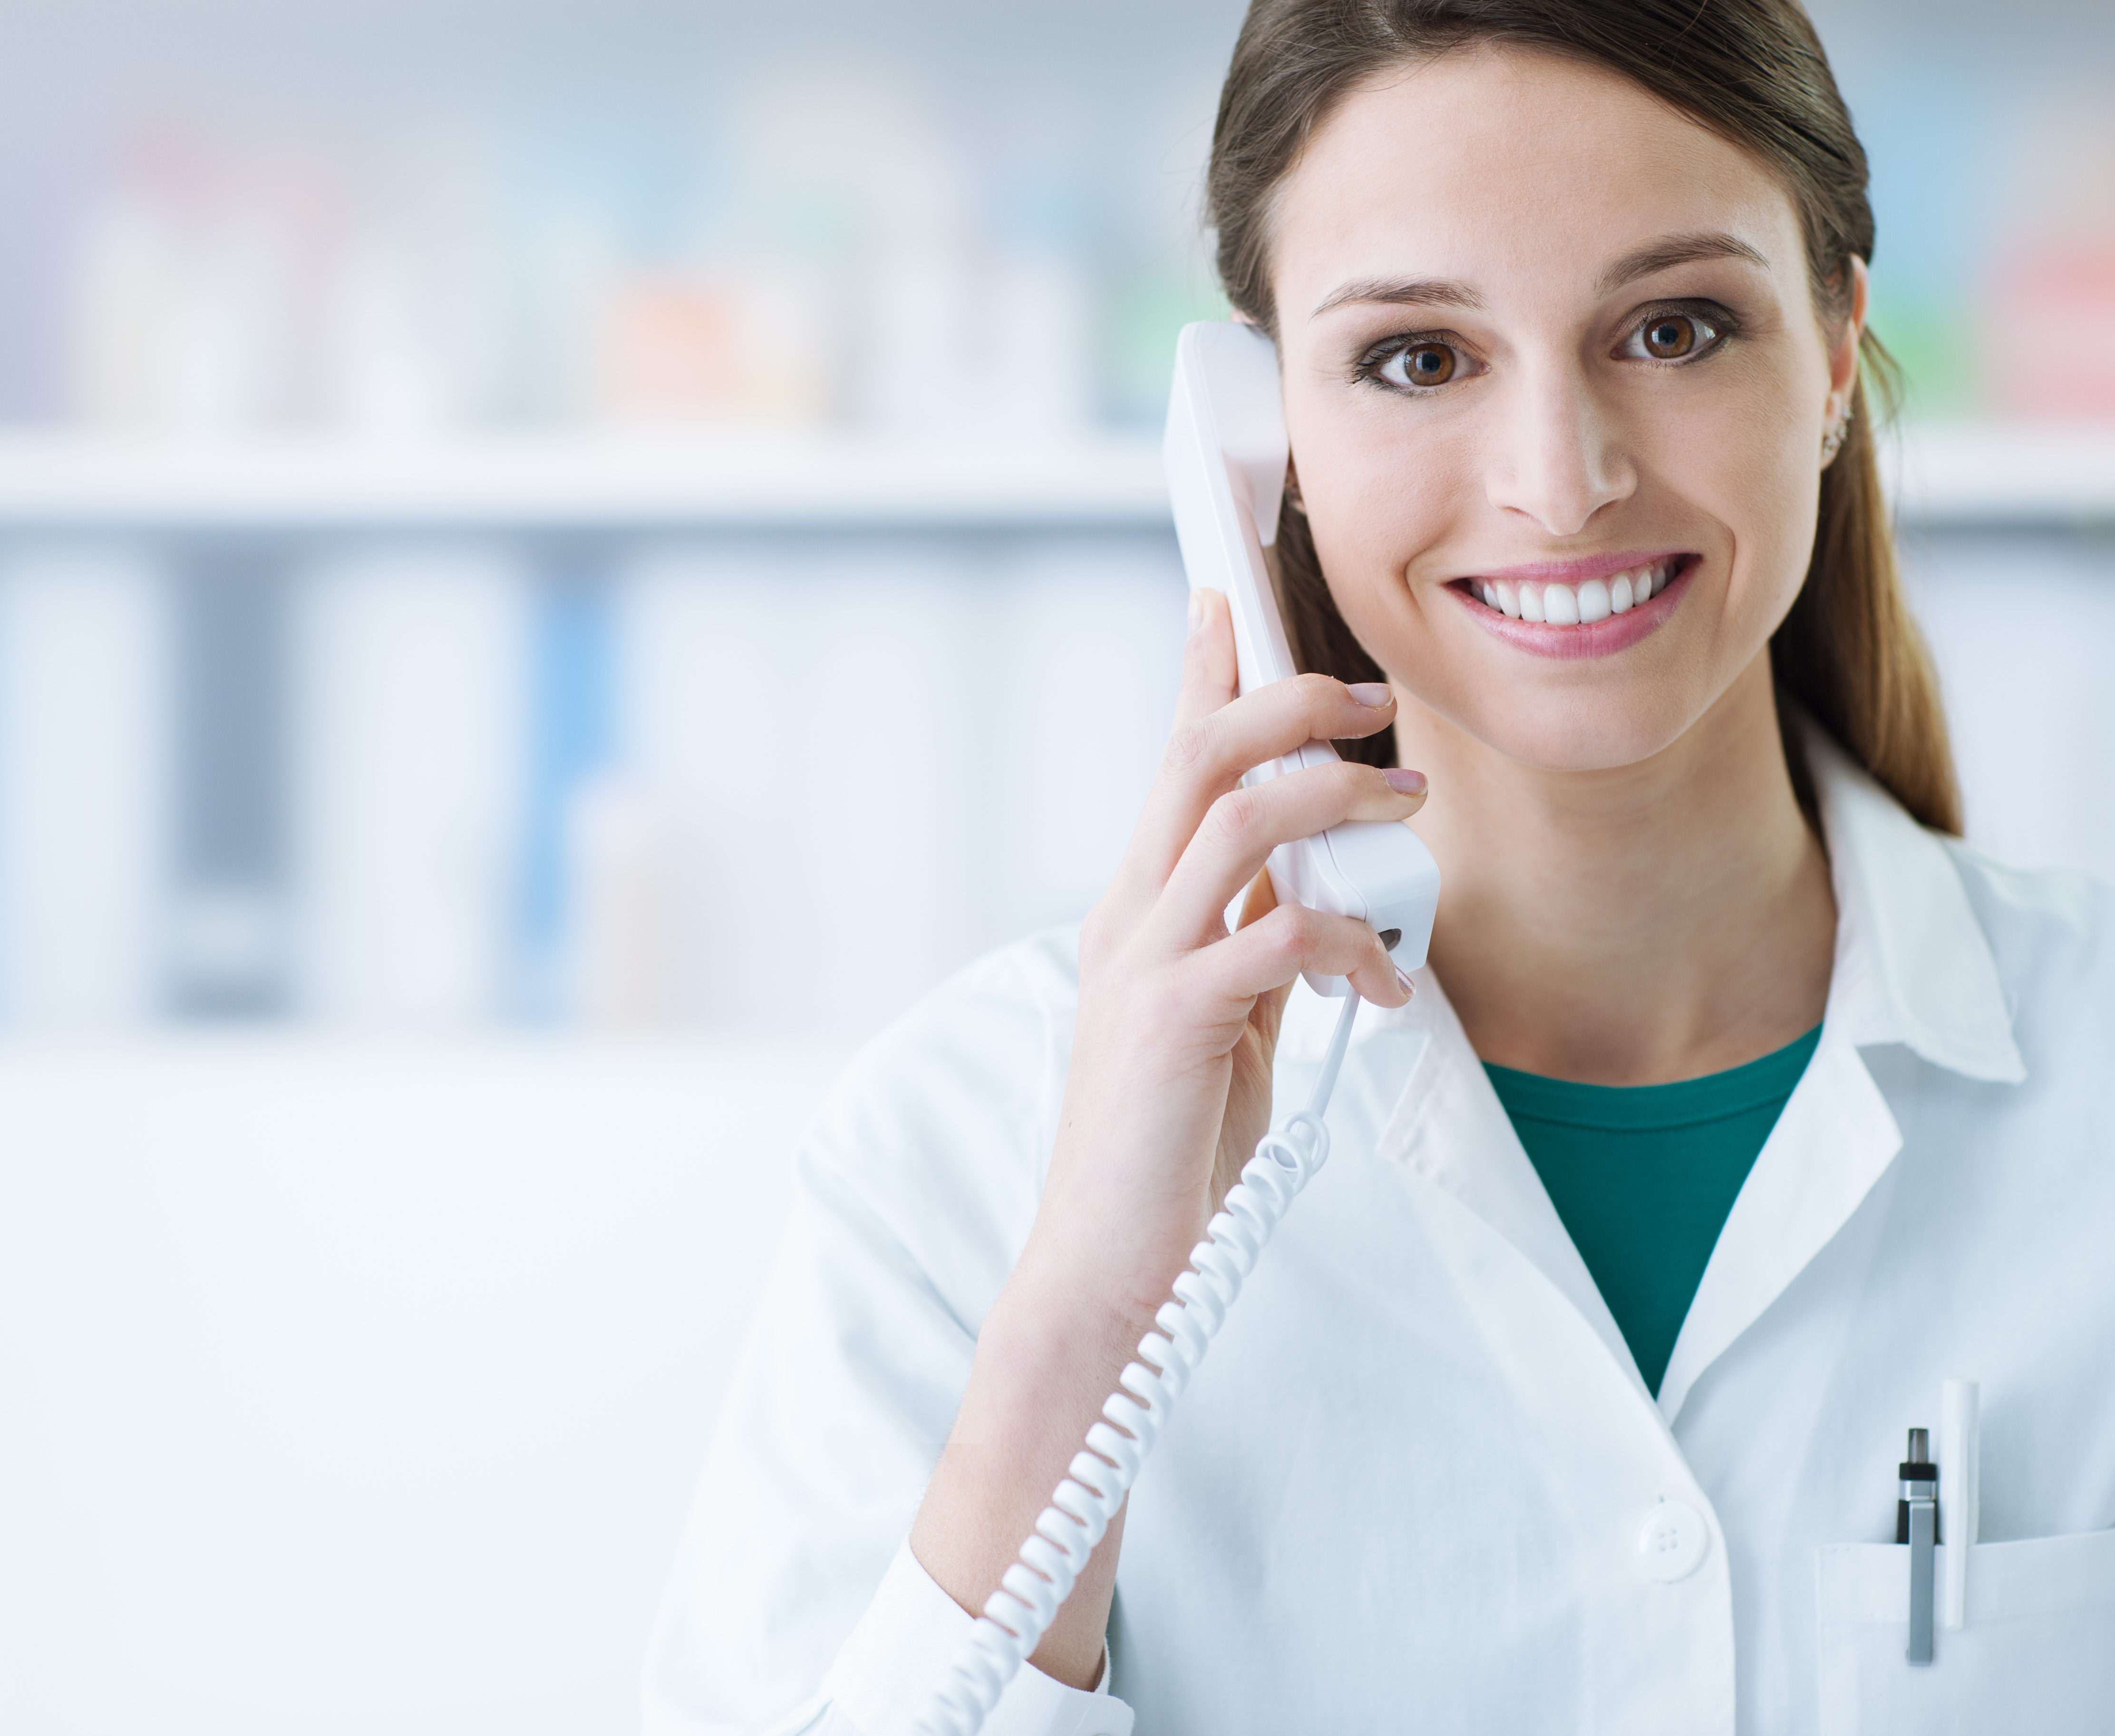 Get the best Chronic Care Management in Texas with Chronic Care Staffing Call 800-661-4324